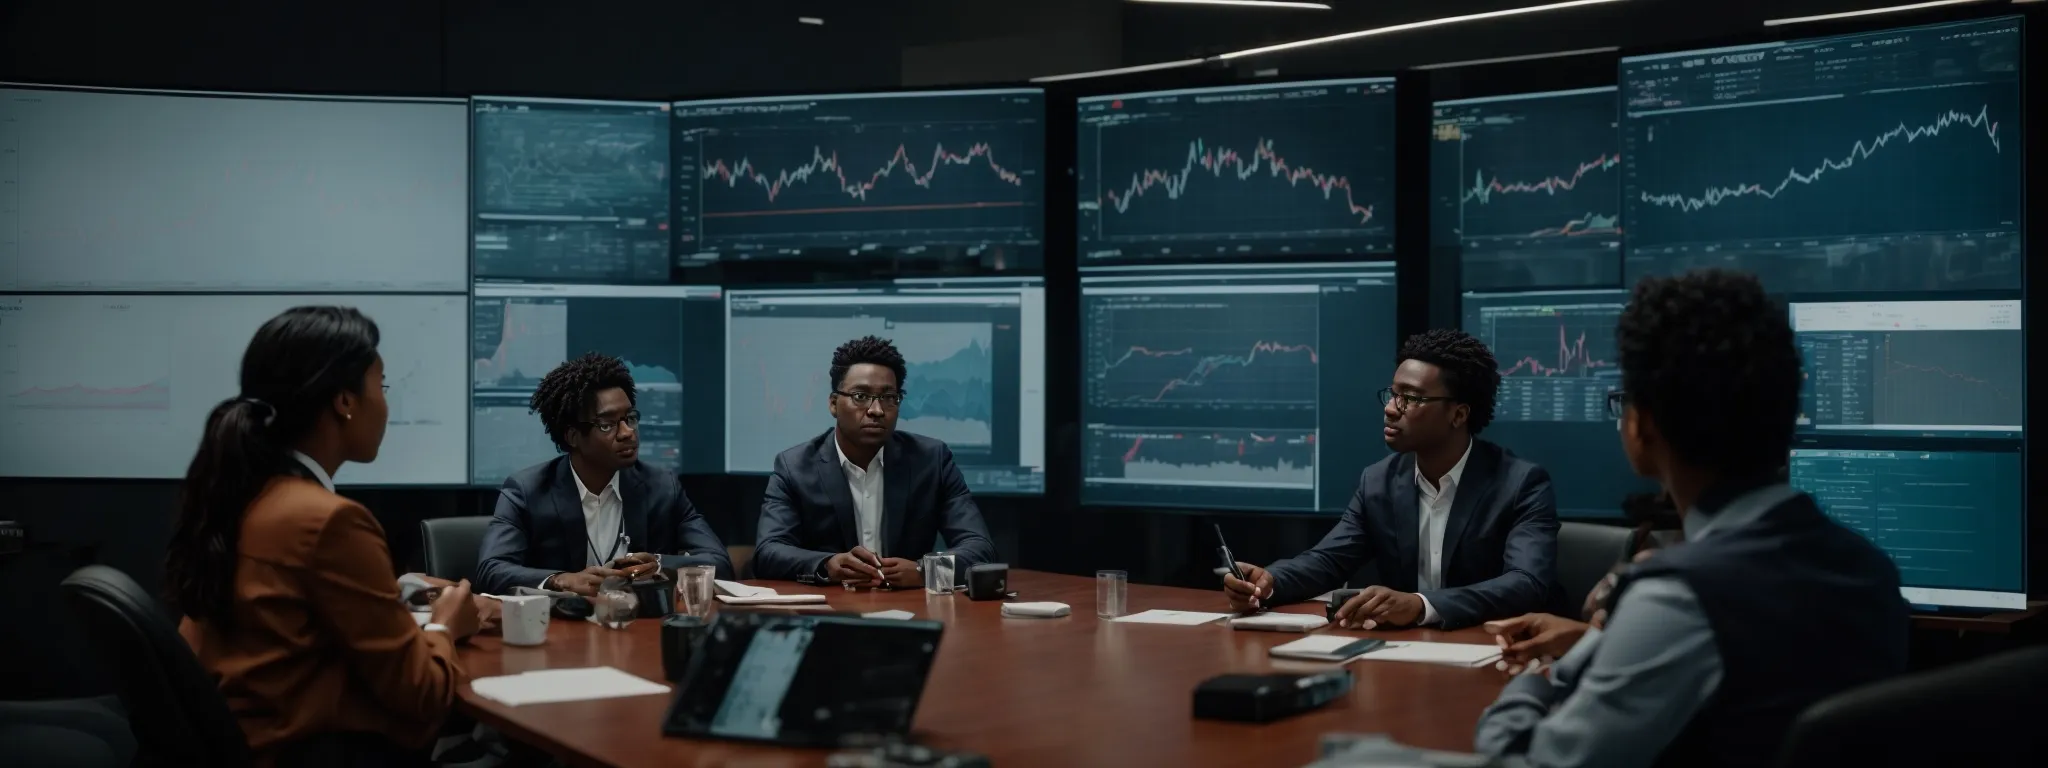 a diverse team gathers around a conference table, intensely discussing charts and graphs projected on the screen.